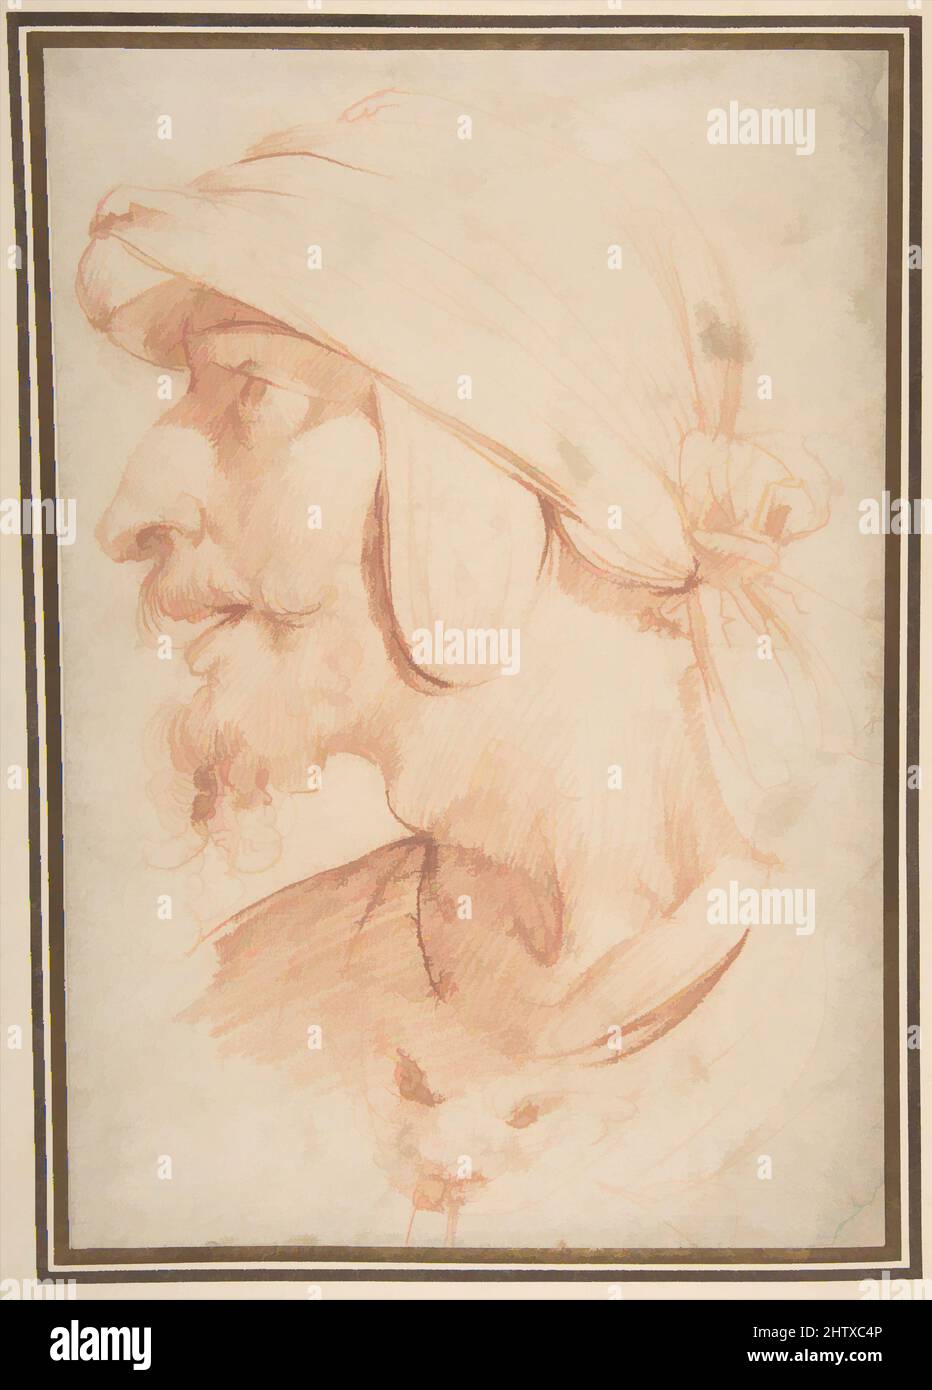 Art inspired by Head of a Warrior, 1597–1601, Red chalk, 11 1/8 x 7 5/8in. (28.2 x 19.4cm), Drawings, Cavaliere d'Arpino (Giuseppe Cesari) (Italian, Arpino 1568–1640 Rome, Classic works modernized by Artotop with a splash of modernity. Shapes, color and value, eye-catching visual impact on art. Emotions through freedom of artworks in a contemporary way. A timeless message pursuing a wildly creative new direction. Artists turning to the digital medium and creating the Artotop NFT Stock Photo